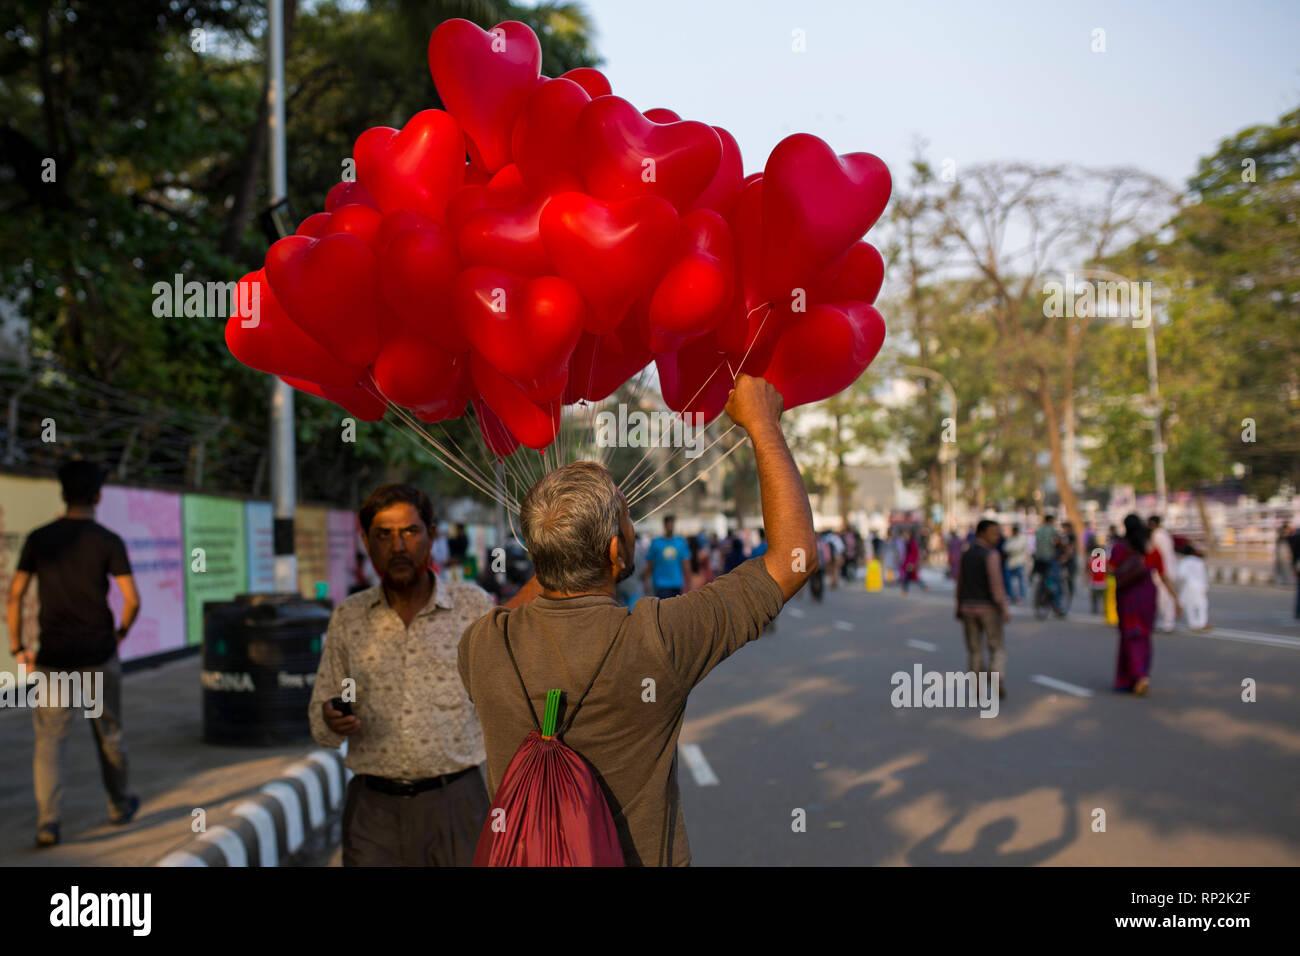 Dhaka, Bangladesh. 20th Feb, 2019.  A hawker sells red balloon in front of the language matyrs monument  in Dhaka, Bangladesh on February 20, 2019.  The nation will pay tribute to the Bangla language movement martyrs who sacrificed their life for their mother tongue in 1952, while the United Nations Educational Scientific and Cultural Organization (UNESCO) declared 21 February as the International Mother Language Day. Credit: zakir hossain chowdhury zakir/Alamy Live News Stock Photo